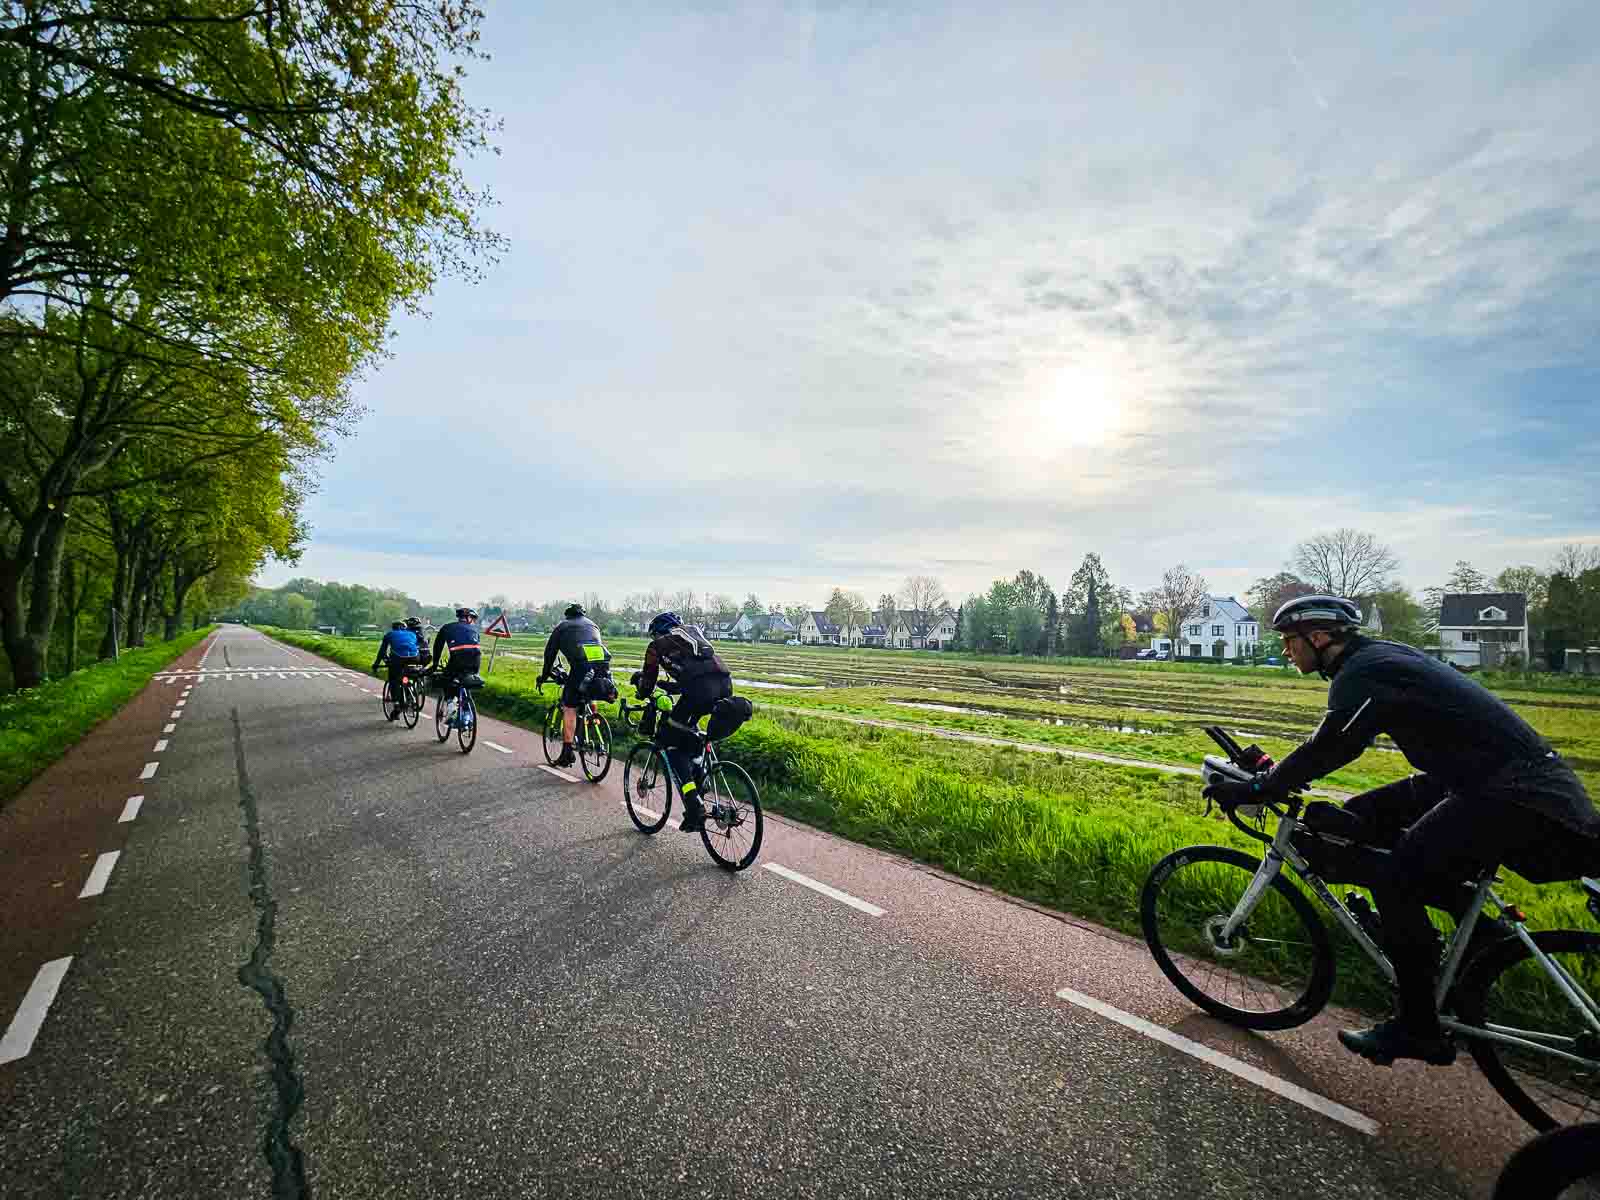 Several cyclists ride behind each other on a road in the Race around the Netherlands